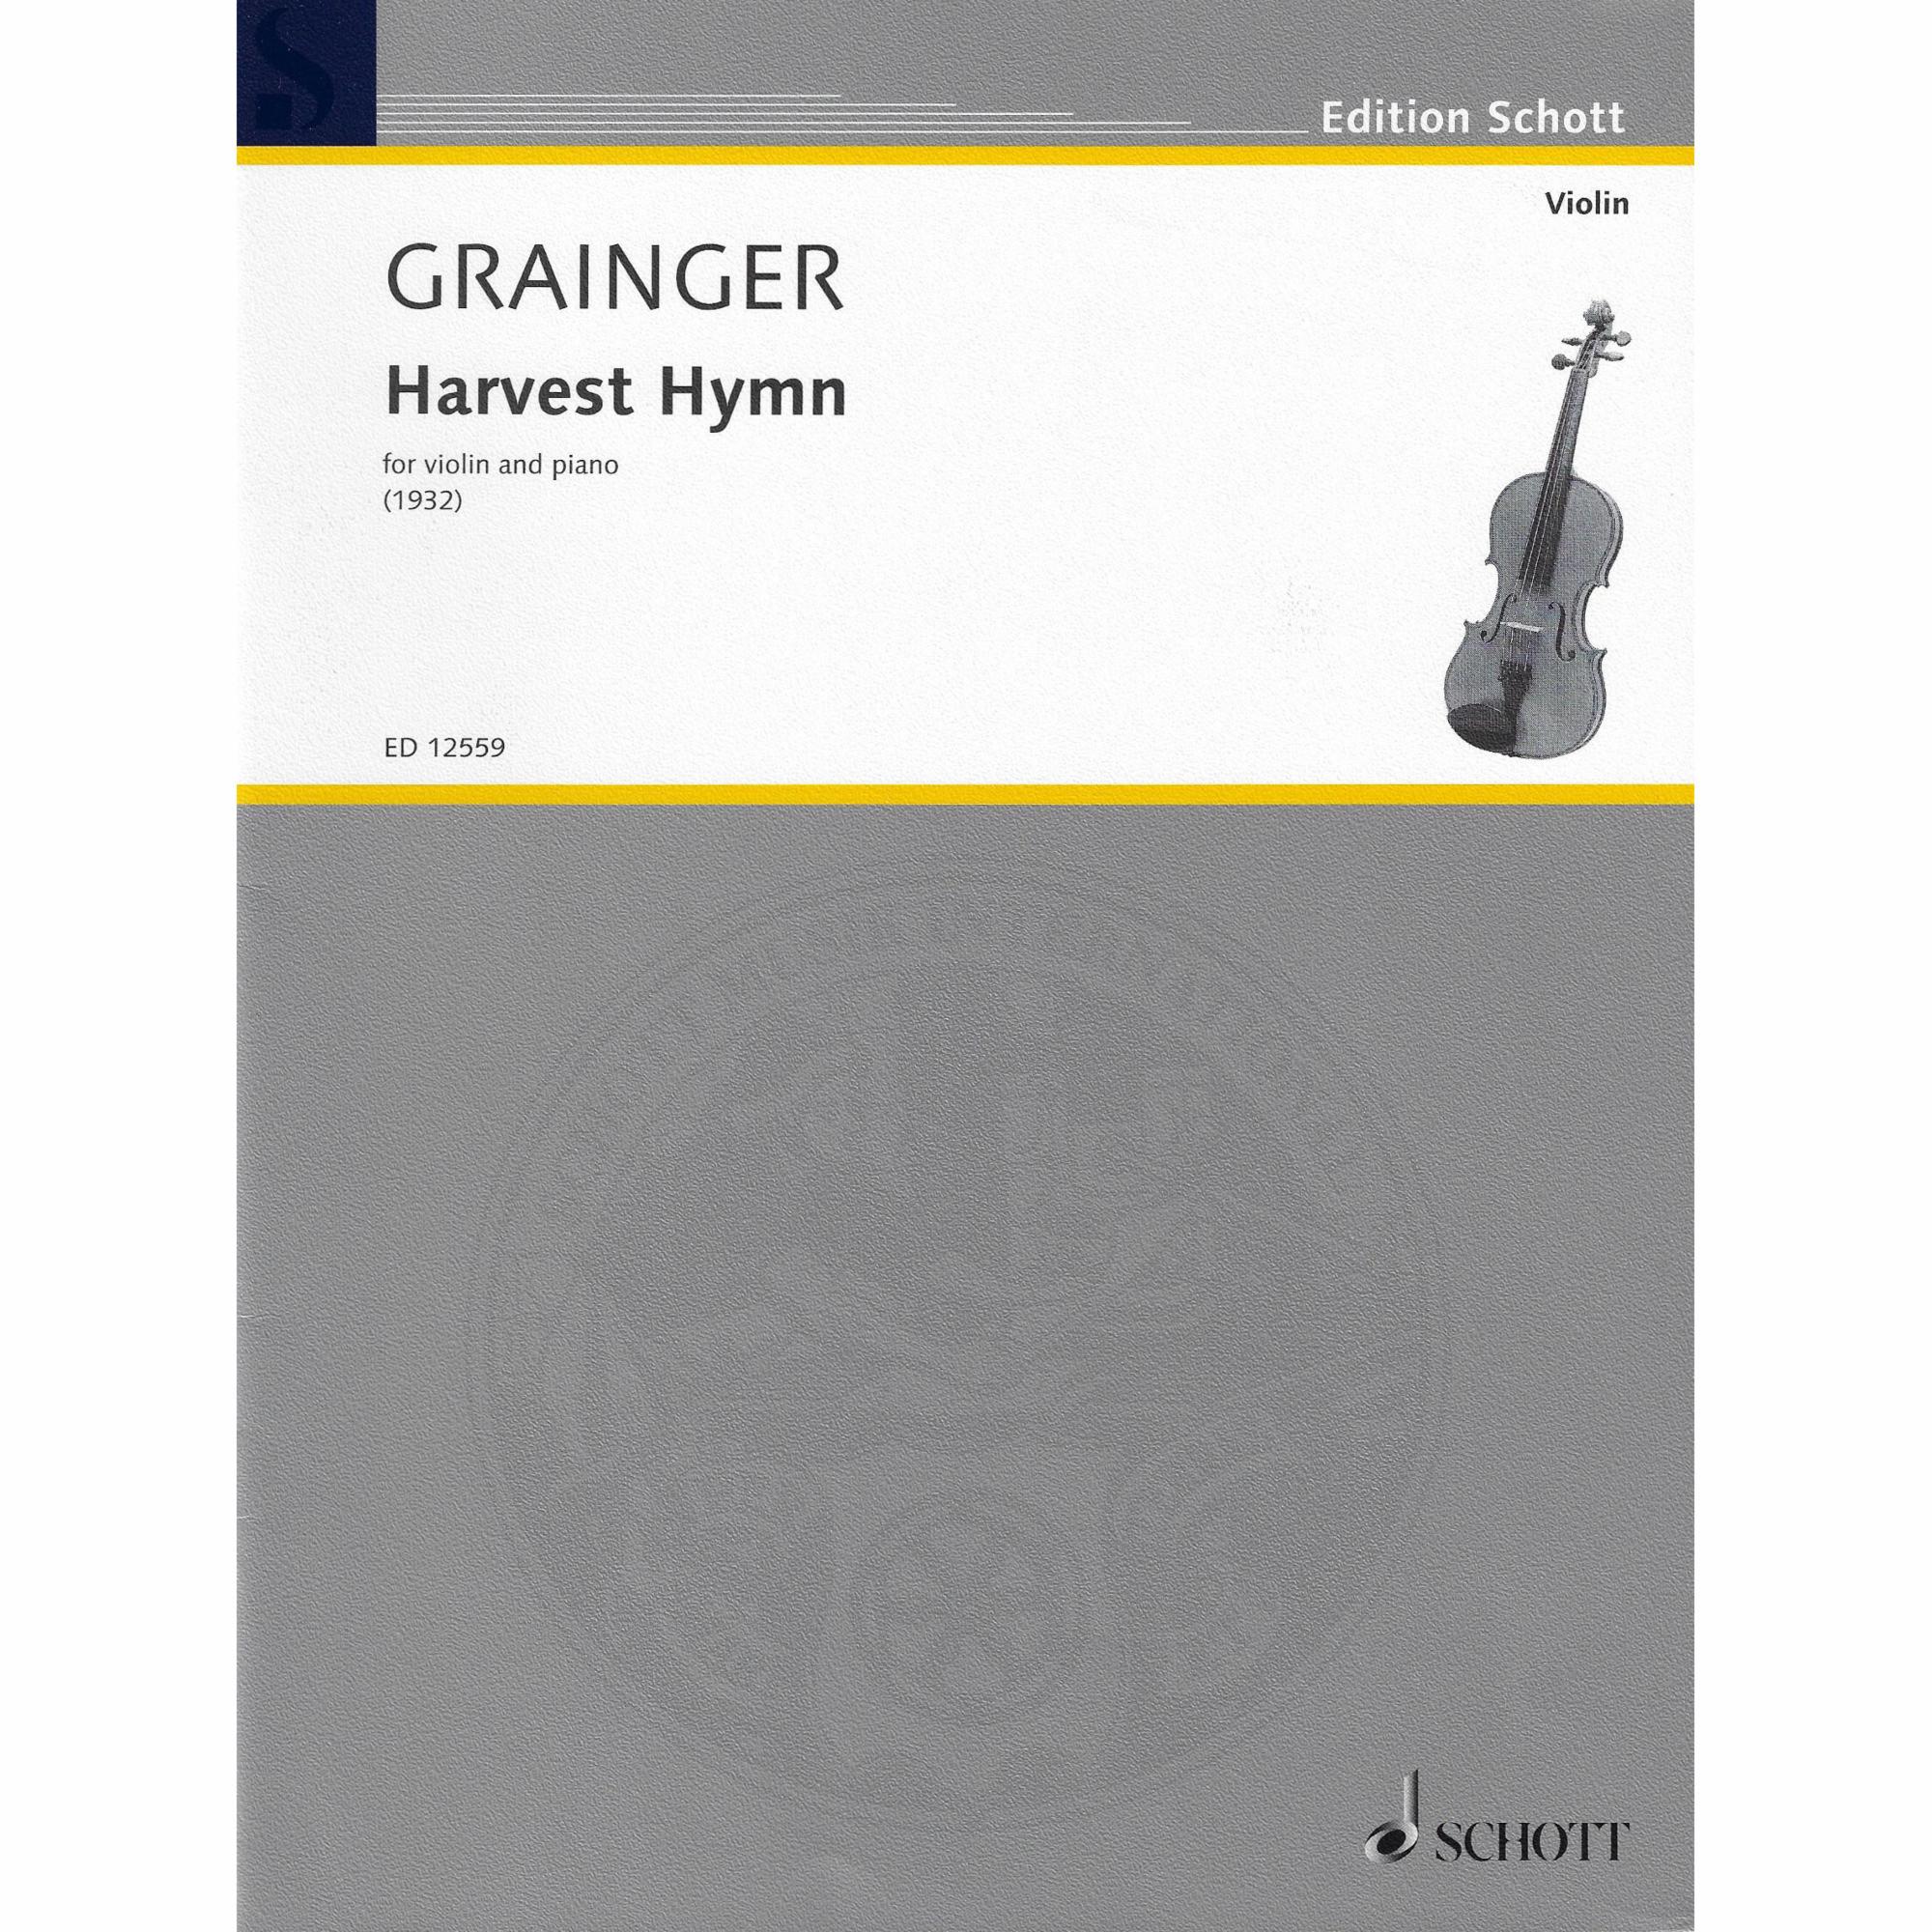 Grainger -- Harvest Hymn for Violin and Piano